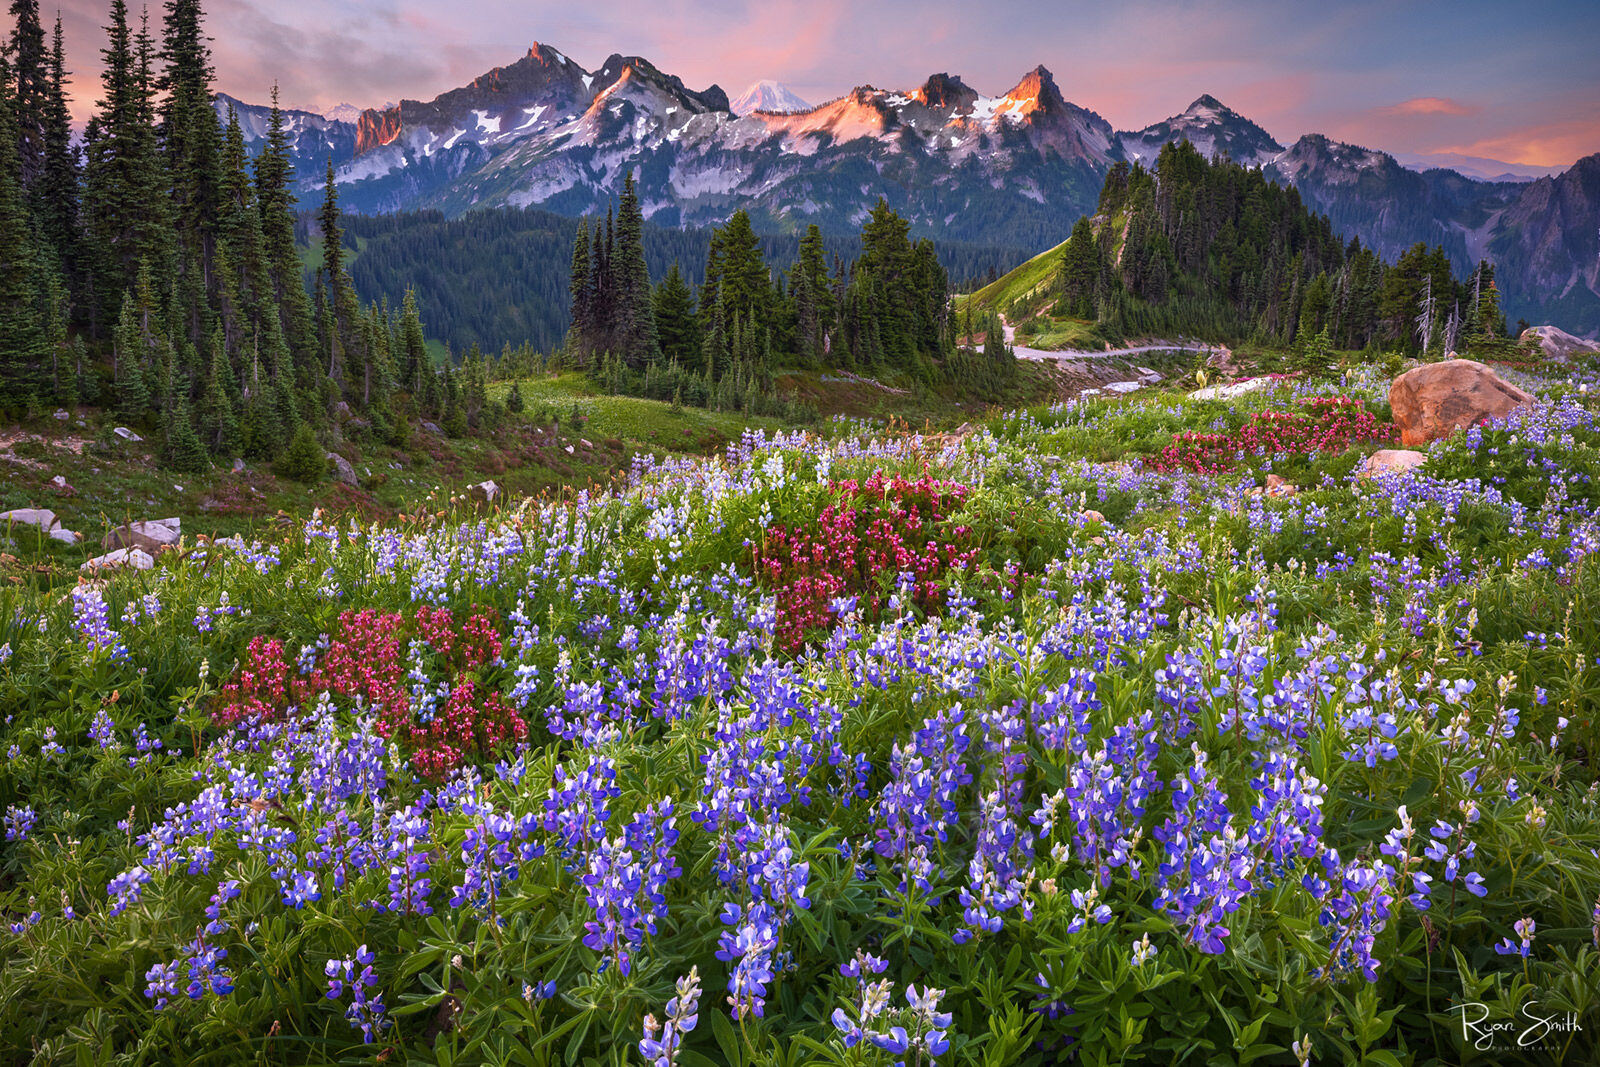 Mount Rainier is seen in the background behind a mountain skyline under pink clouds at sunset, a meadow of spruce trees, purple and red wildflowers in a meadow.